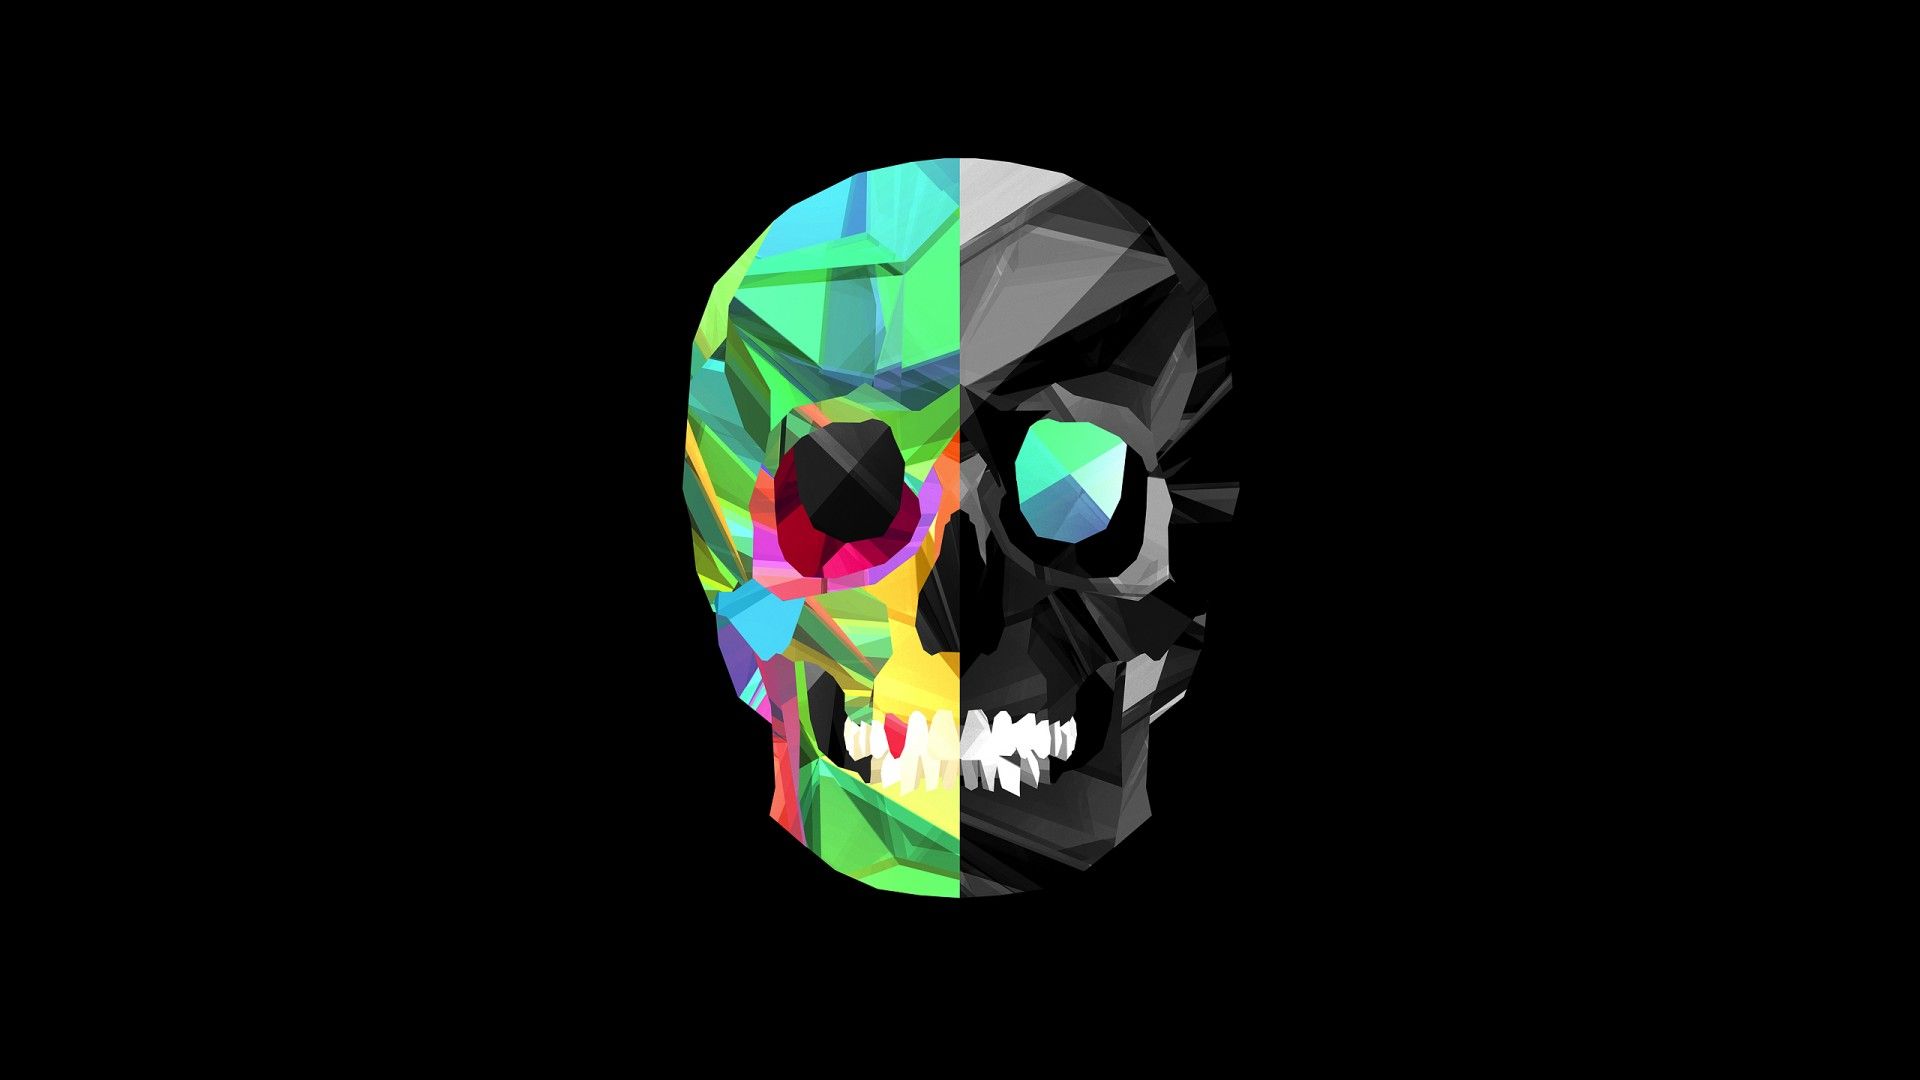 Download Awesome Skull Wallpaper 4602 1920x1080 px High Resolution